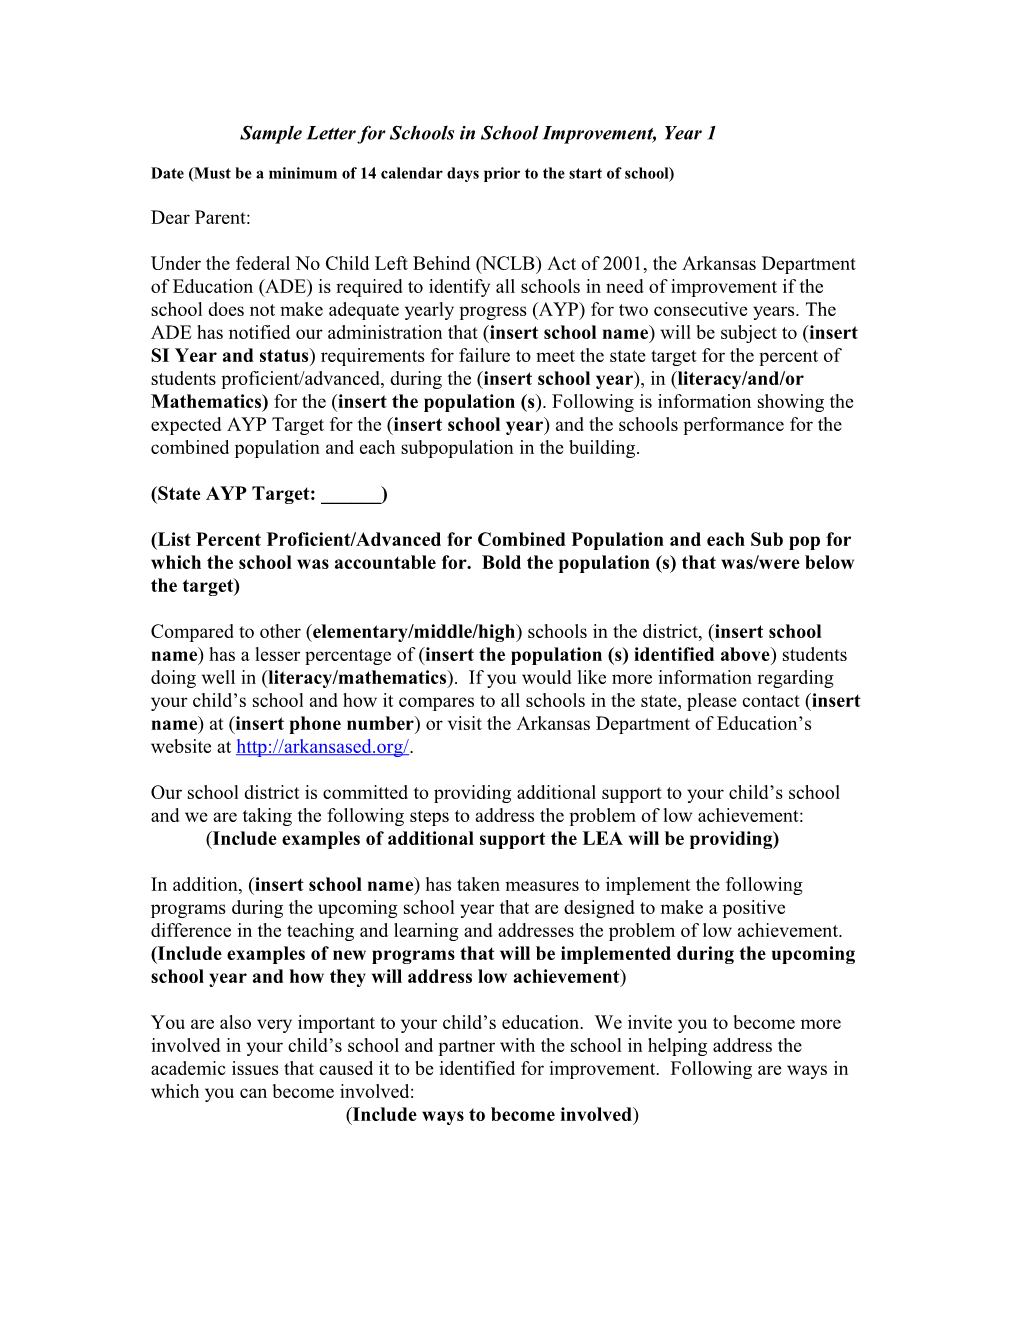 Sample Letter for Schools in School Improvement, Year 1